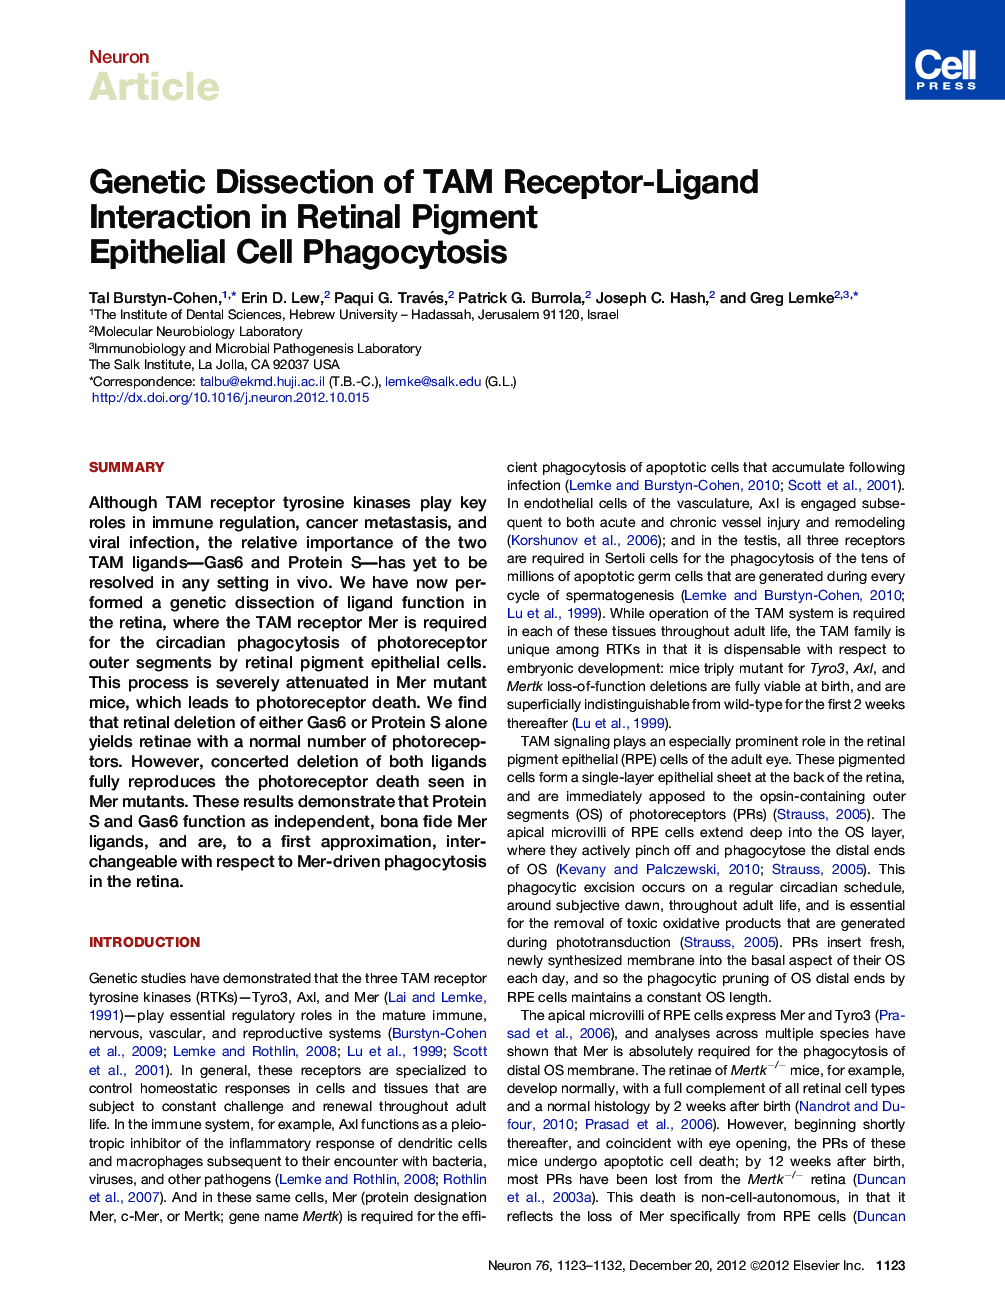 Genetic Dissection of TAM Receptor-Ligand Interaction in Retinal Pigment Epithelial Cell Phagocytosis